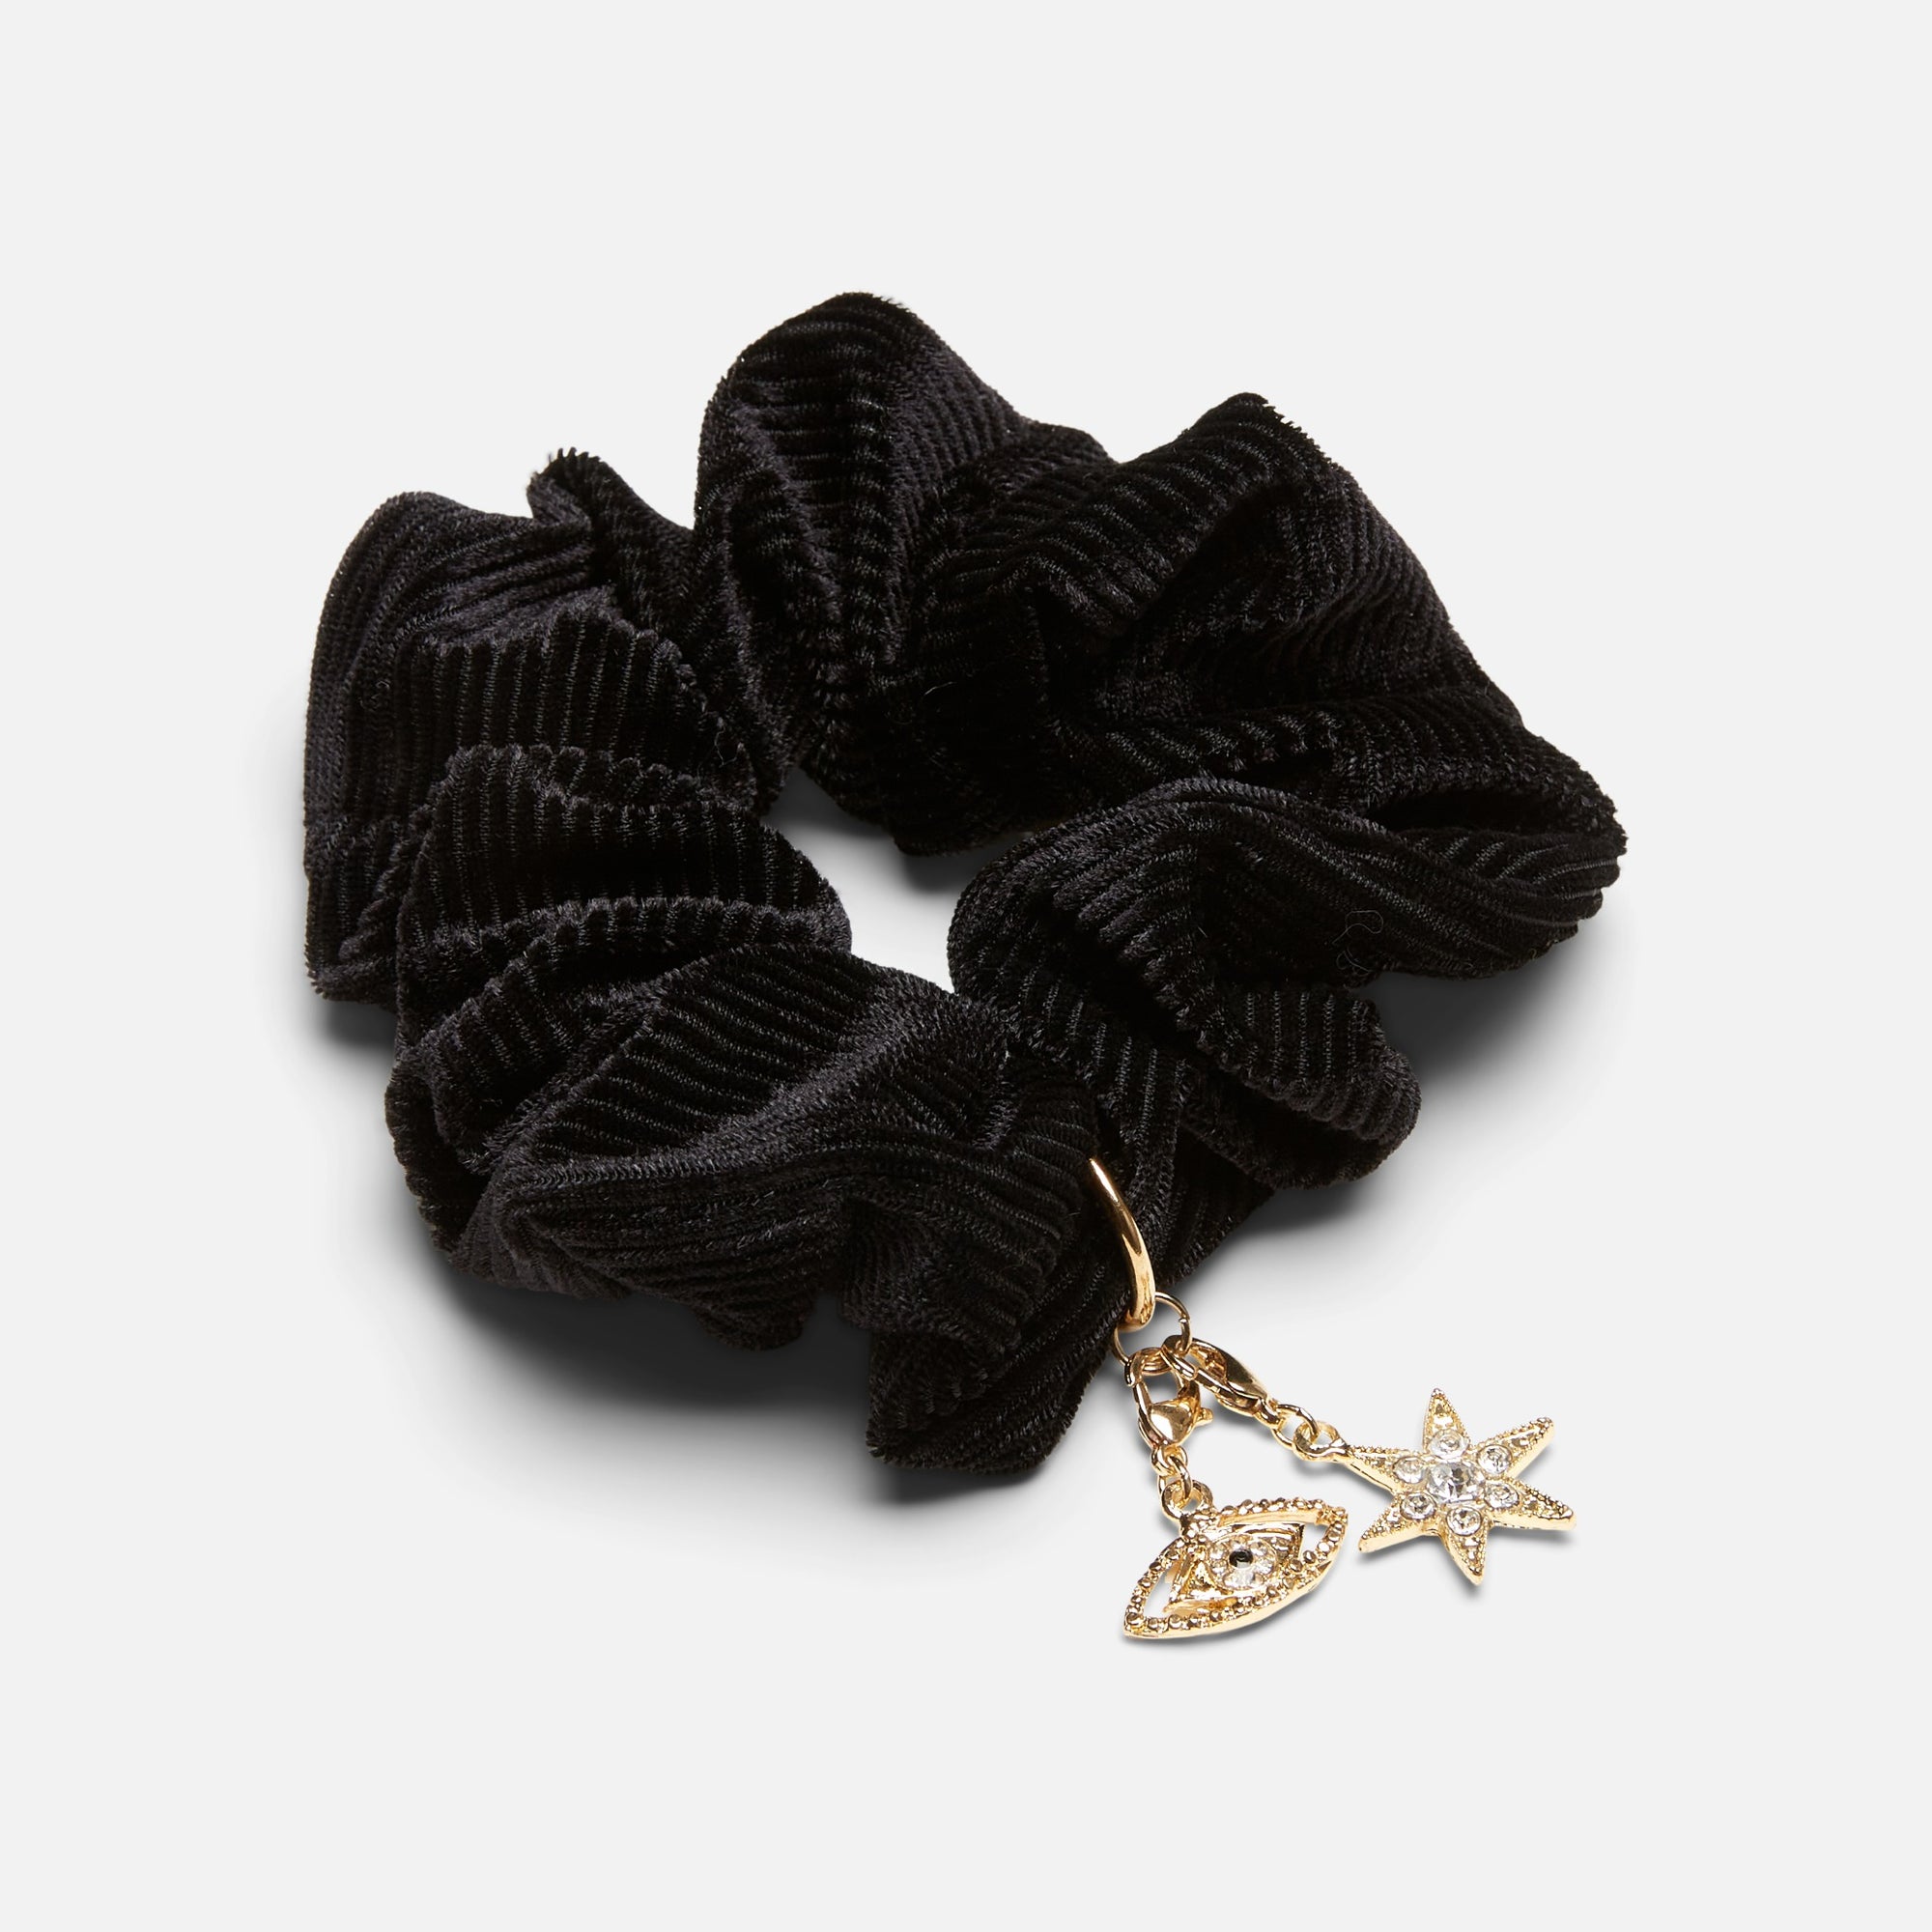 Black velvet scrunchie with removable charms